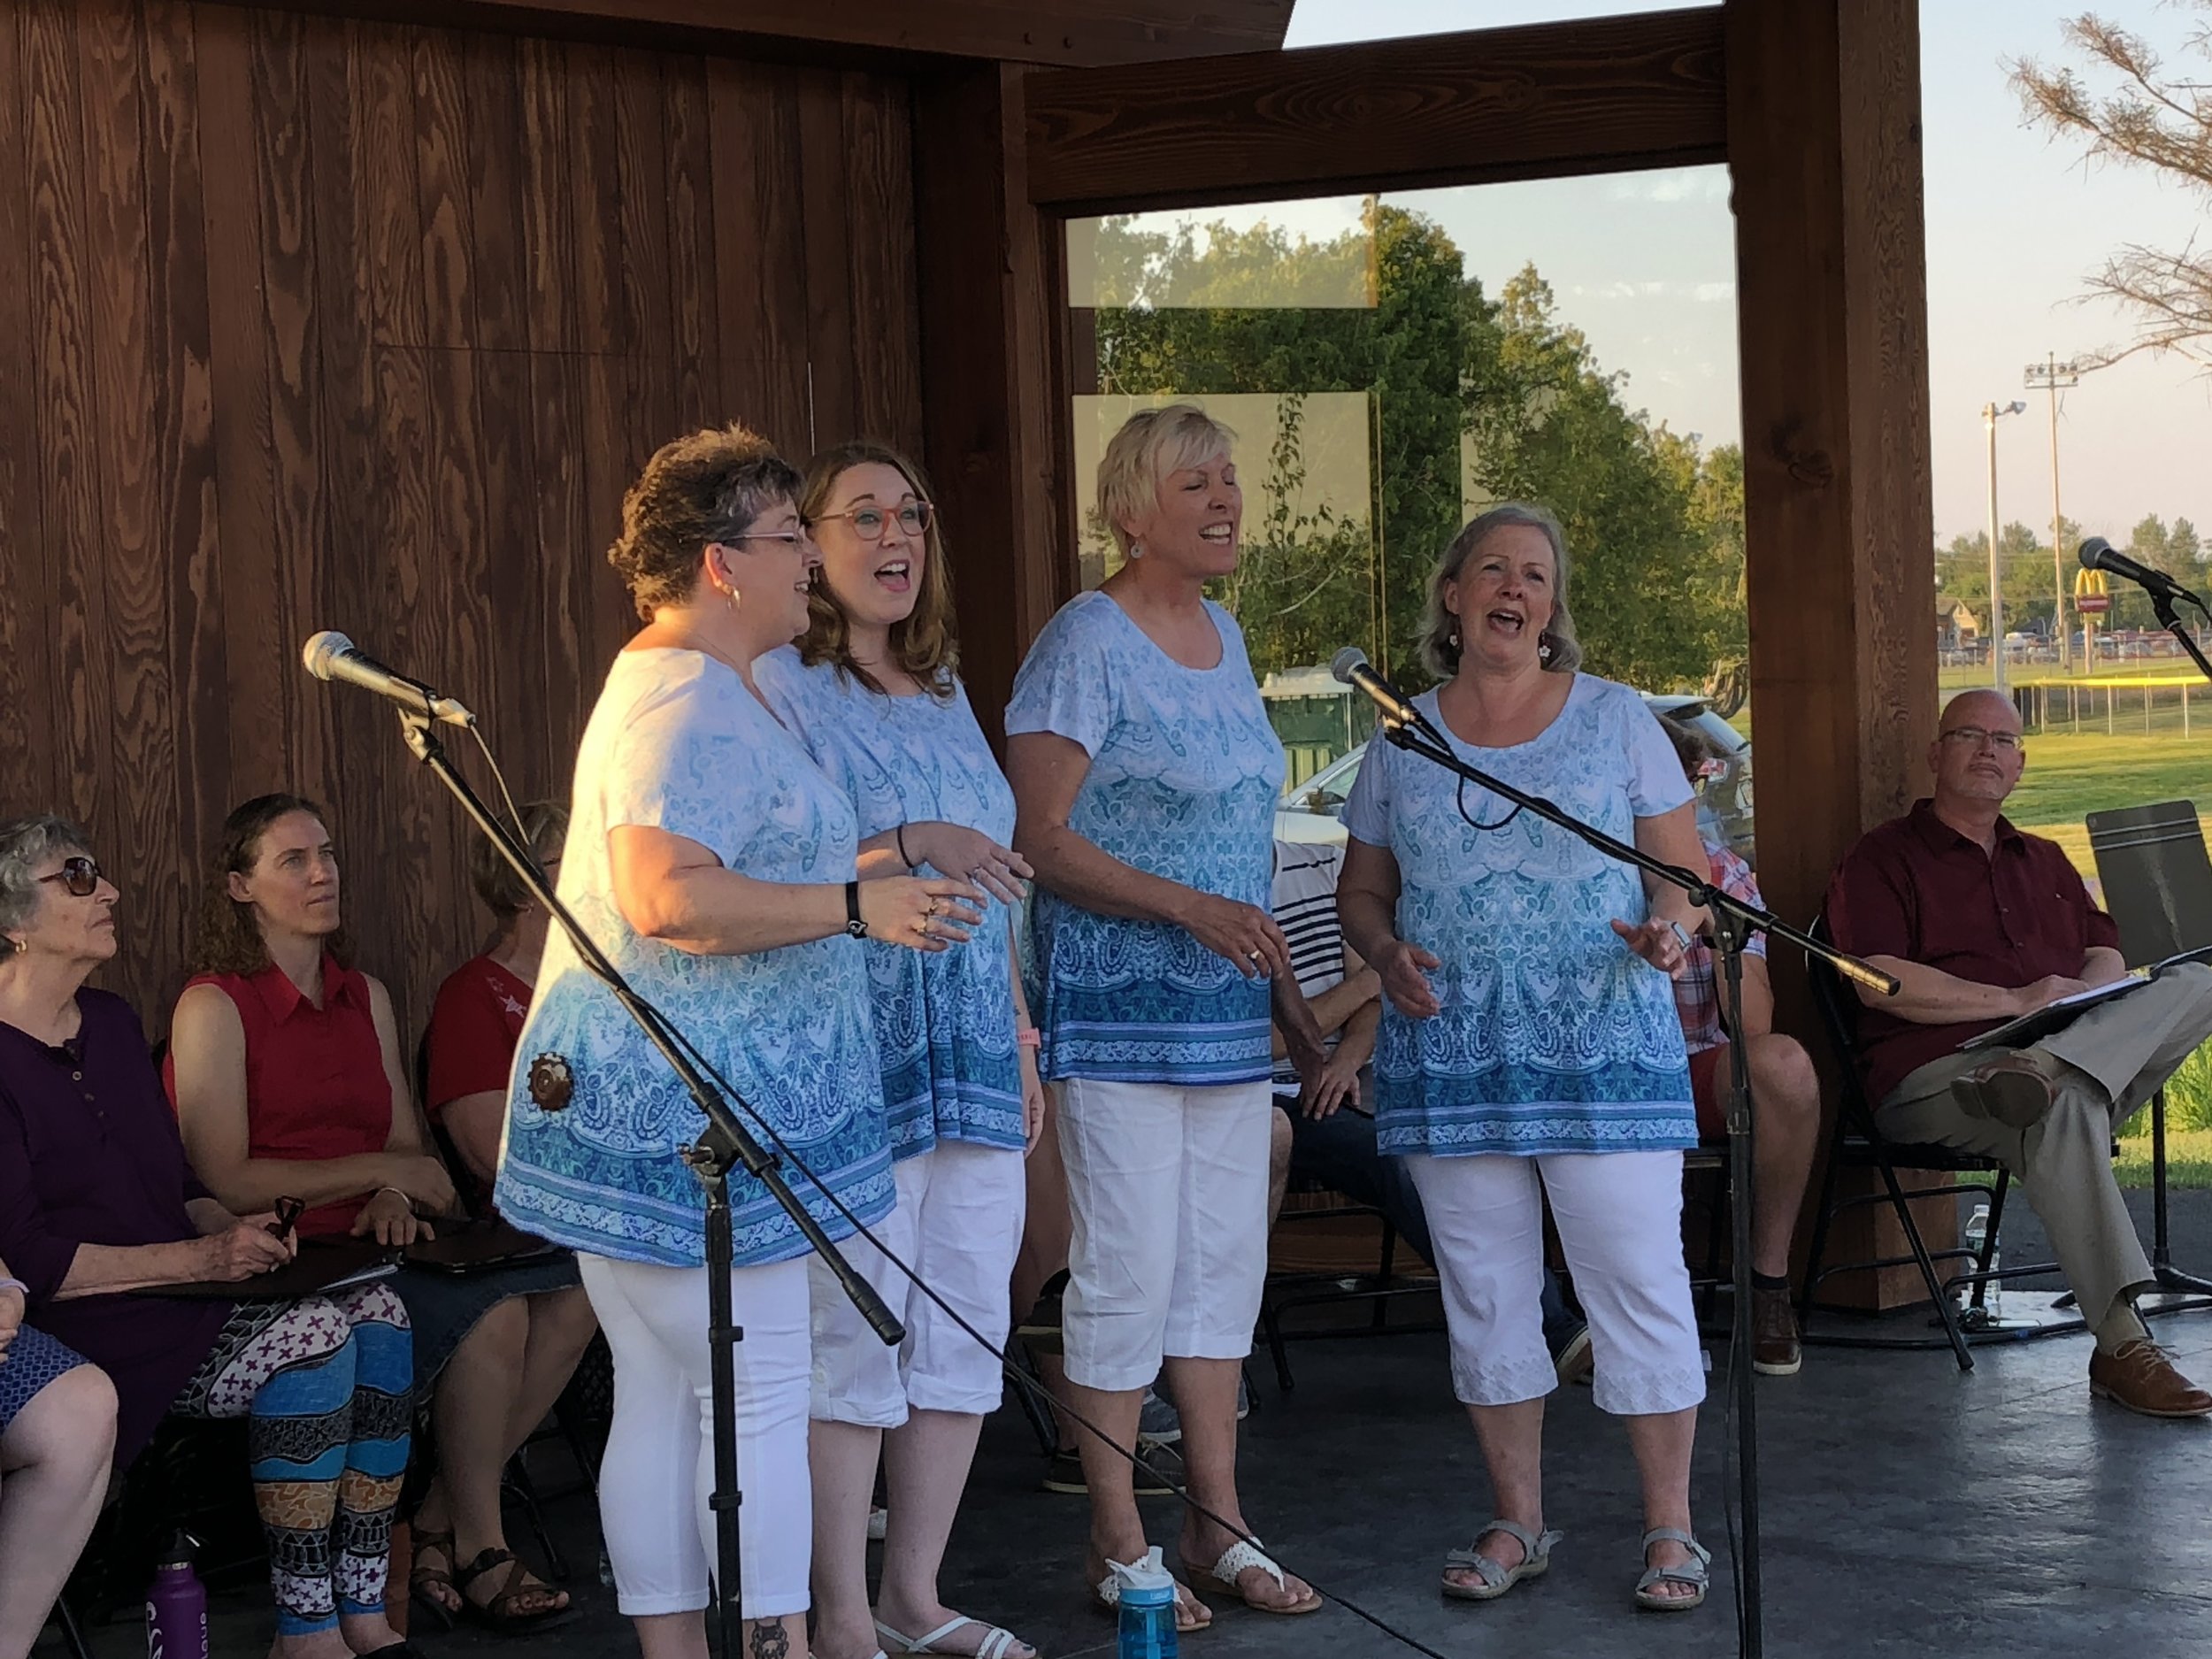   The second group to perform there as part of Tupper Arts' Summer Sunset Series was put together by Tupper Arts mainstays Liz and George Cordes and their associates in High Peaks Opera, past and present members of the local Red and Black Players, an